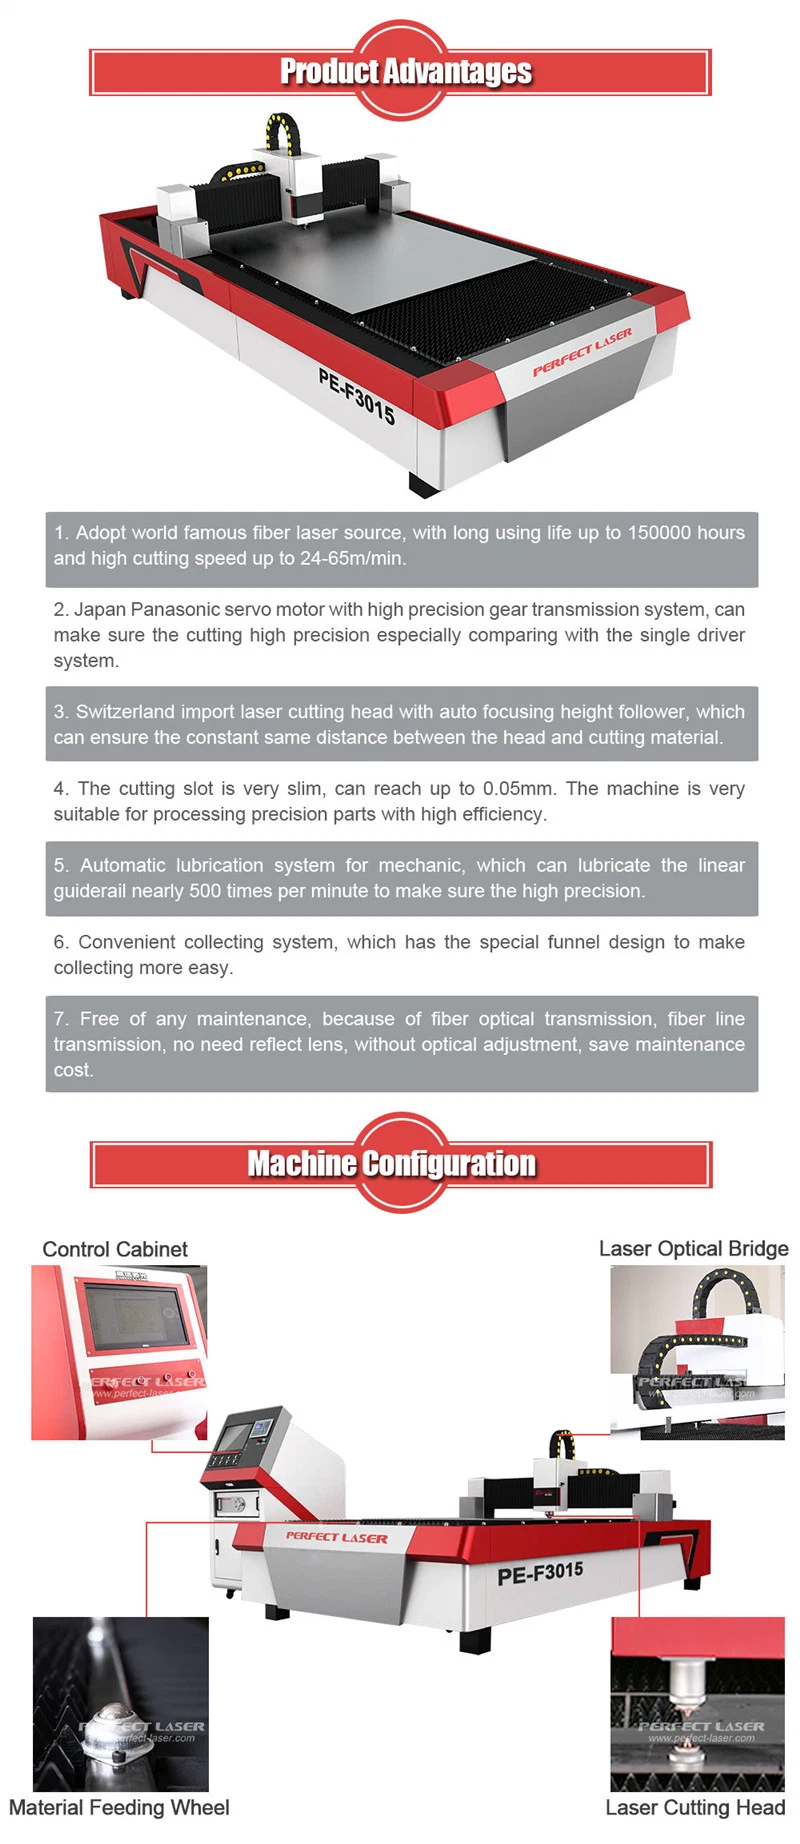 Perfect Laser 1000W High Precision Ss CS Ms CNC Metal Stainless 3teel Laser Cutter Cutting Machine